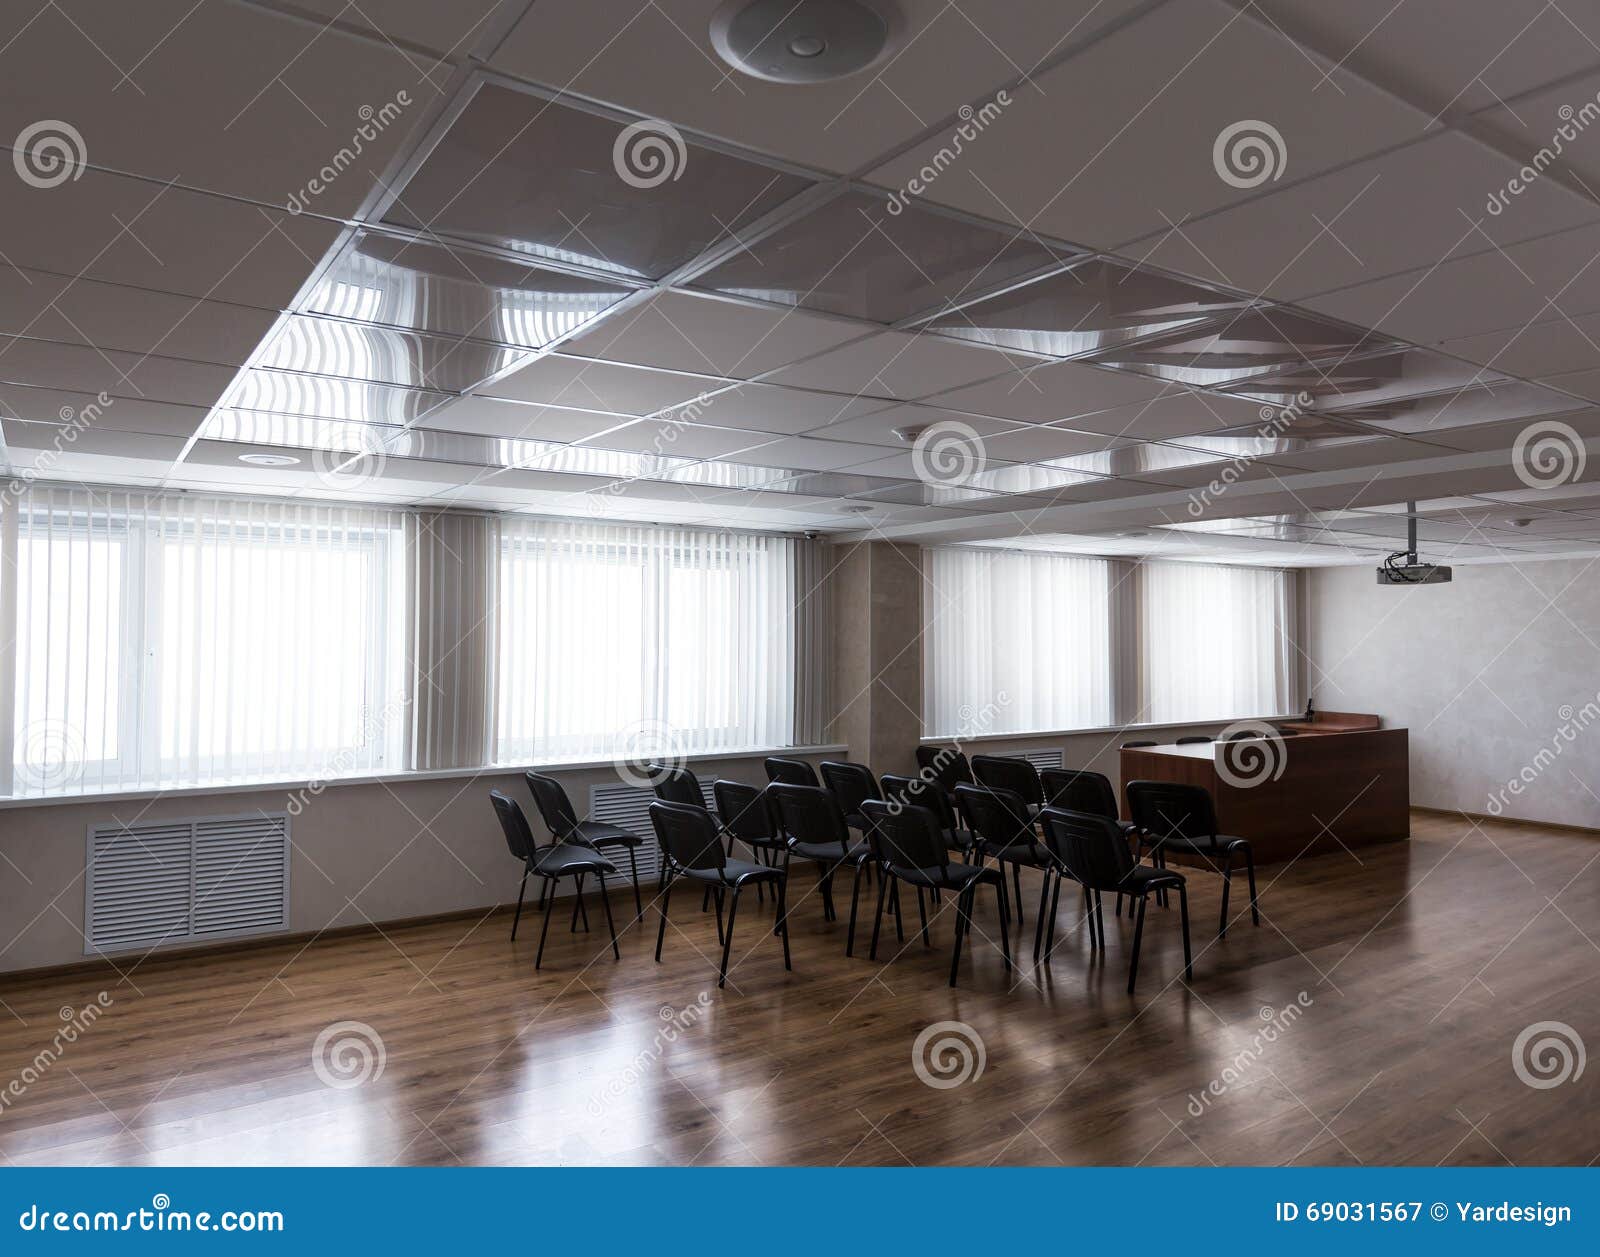 Projector Hang On Ceiling Of Empty Sunlit Meeting Room Stock Image